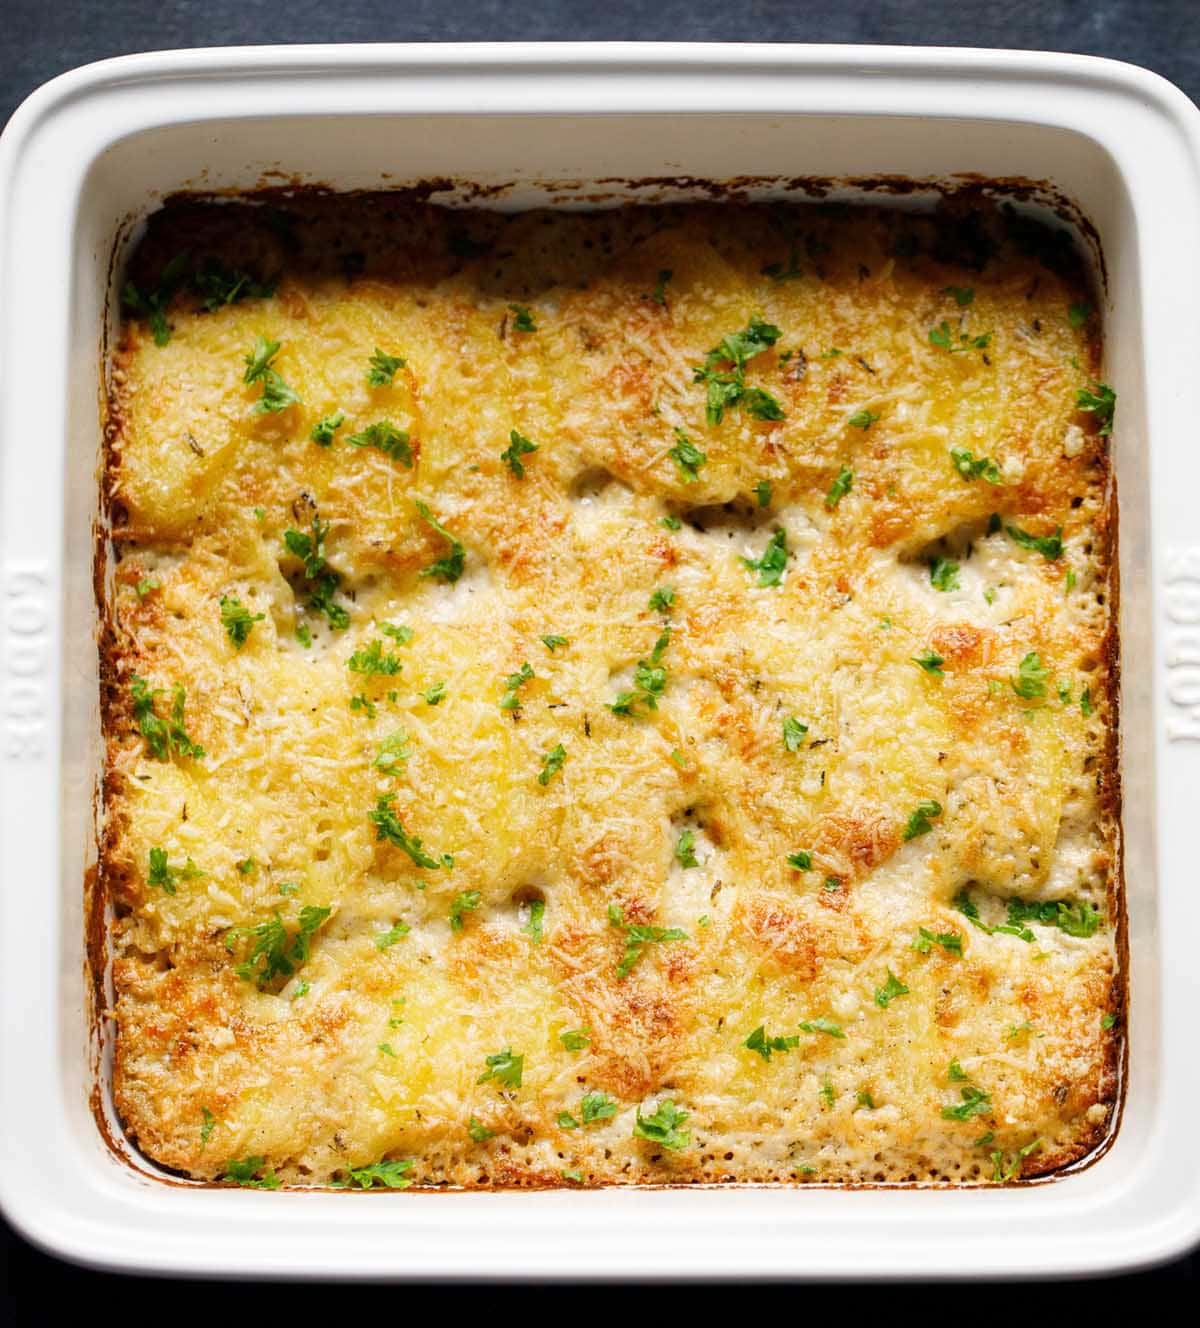 Roast the potatoes gratin in a white baking dish and garnish with parsley.